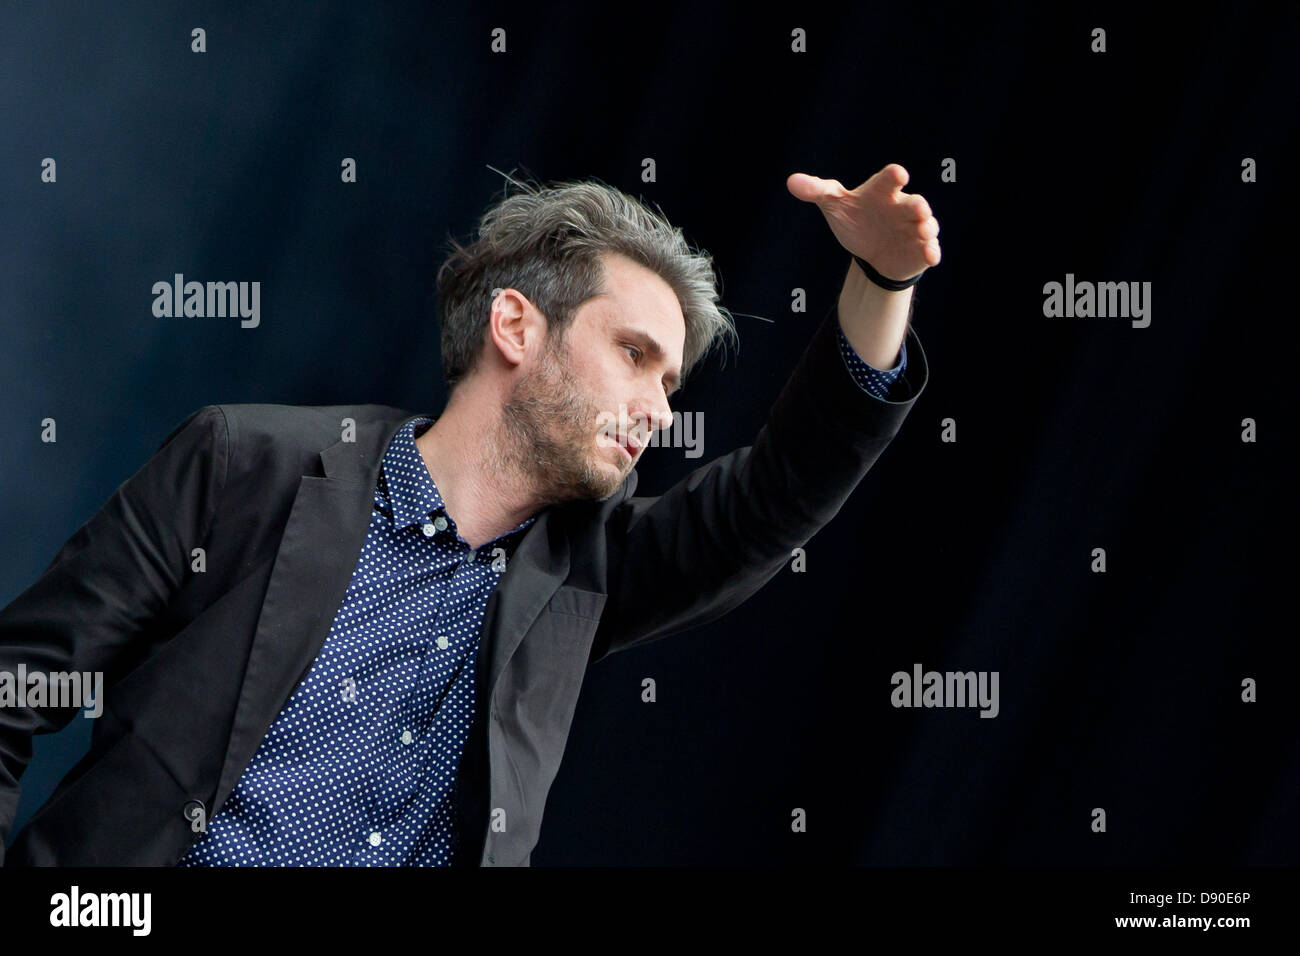 Nuremberg, Germany. 7th June 2013. Front man of German band Tocotronic, Dirk von Lowtzow, performs at the music festival 'Rock im Park' in Nuremberg, Germany, 07 June 2013. Over 70,000 rock musicians are expected to the festival which continues until 09 June. Photo: DANIEL KARMANN/dpa/Alamy Live News Stock Photo